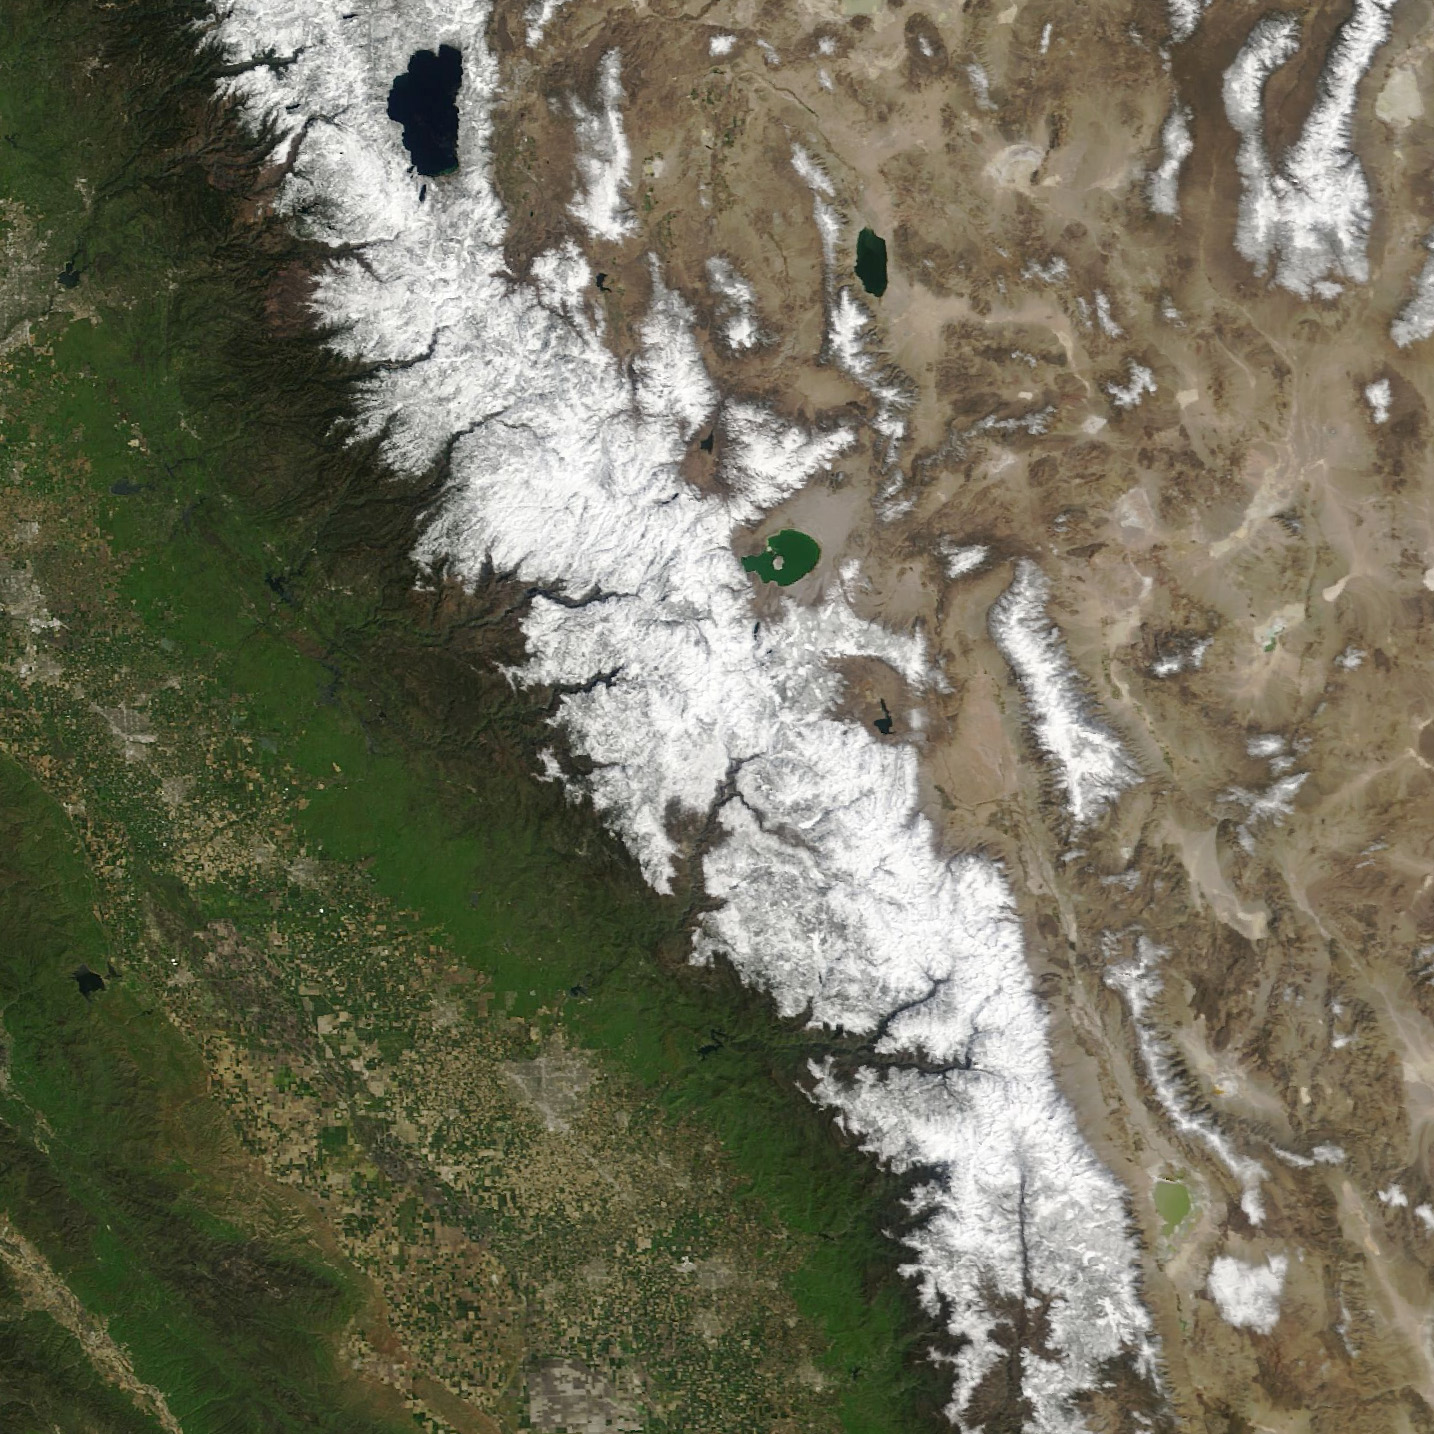 Satellite image shows the varied landscapes of central and eastern California. On the left is the verdant green San Joaquin Valley, cutting diagonally across the image from top left to bottom right are the Sierra Nevada Mountains which are significantly whitened by this winter's snowfall. To the right is the more arid and sandy climate, typical to Nevada. There are sporadic snow covered peaks.